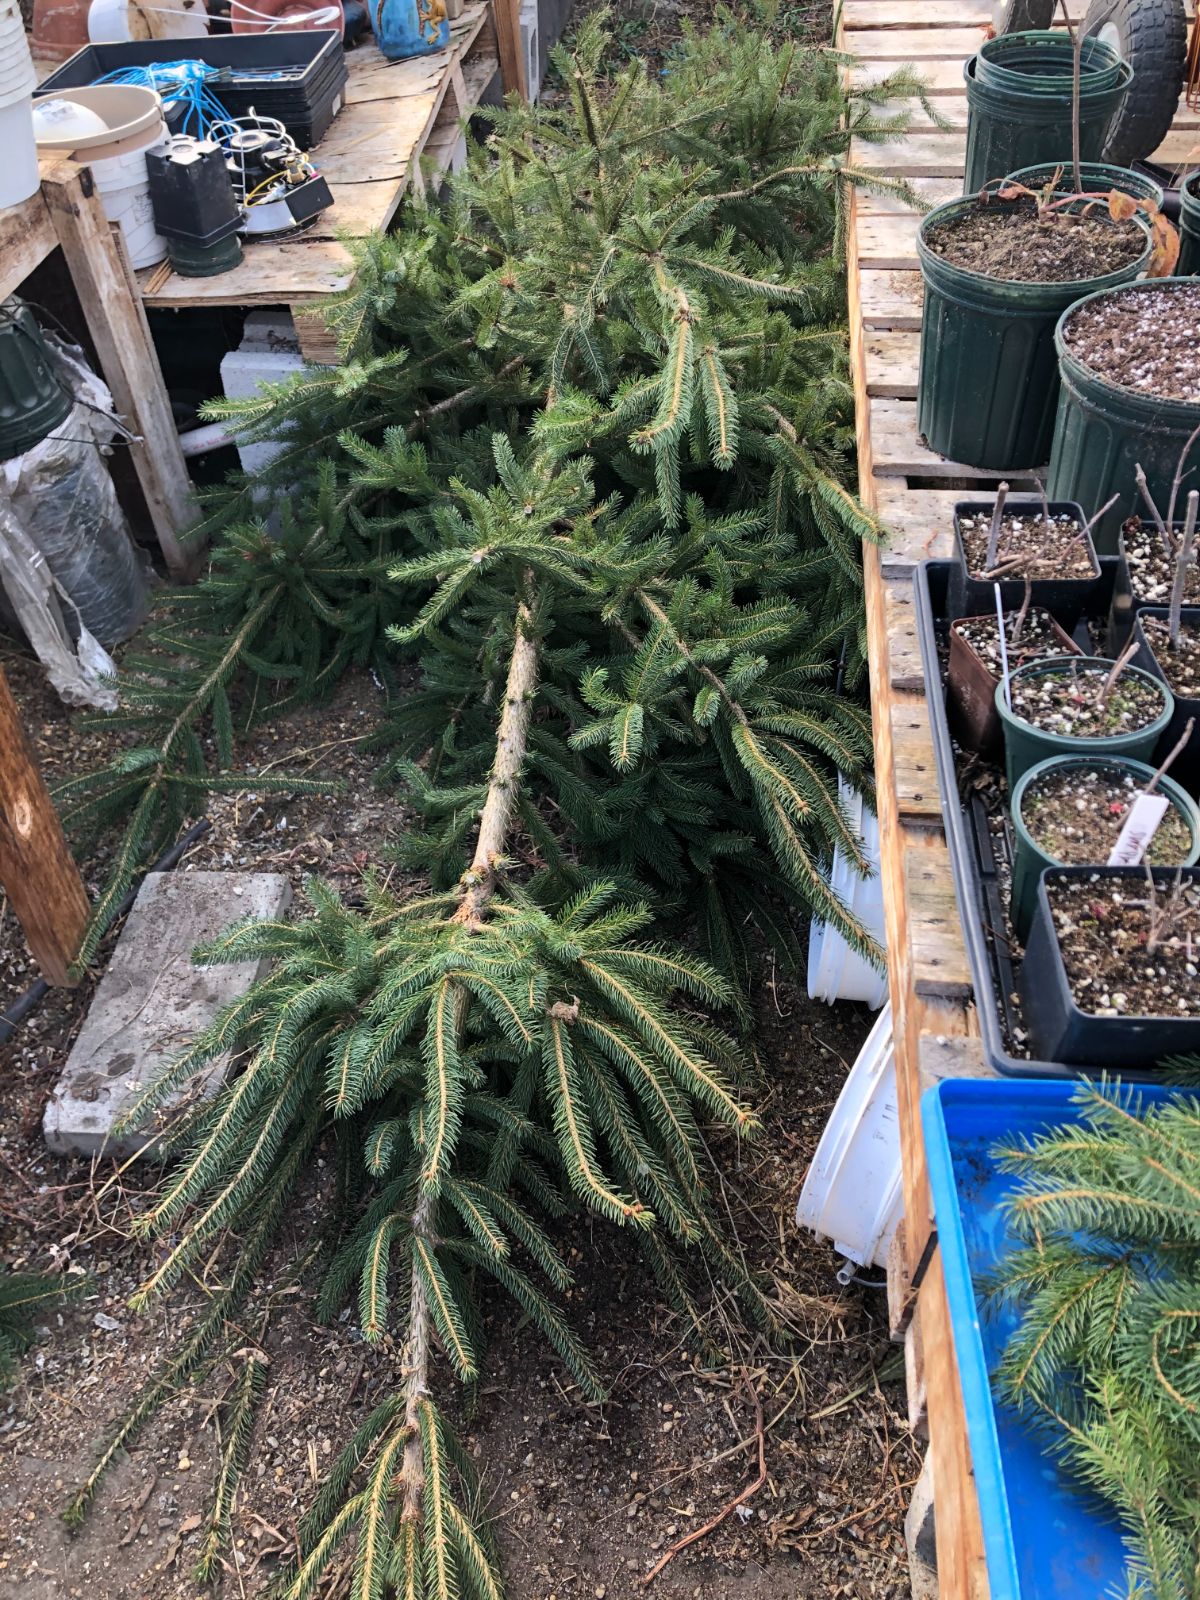 A Christmas tree ready for a hugelkutur system